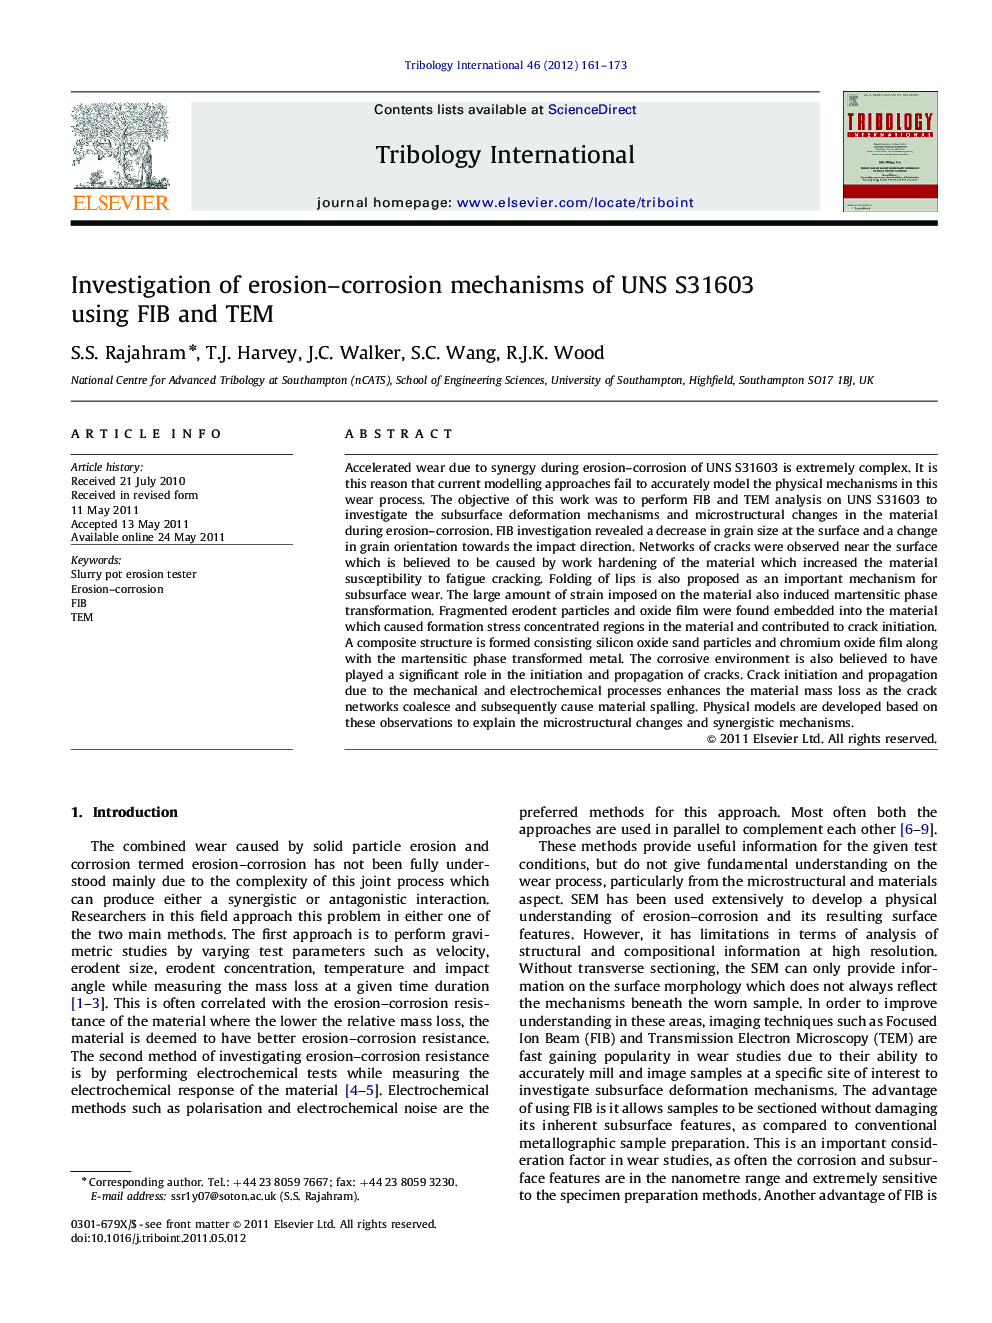 Investigation of erosion-corrosion mechanisms of UNS S31603 using FIB and TEM